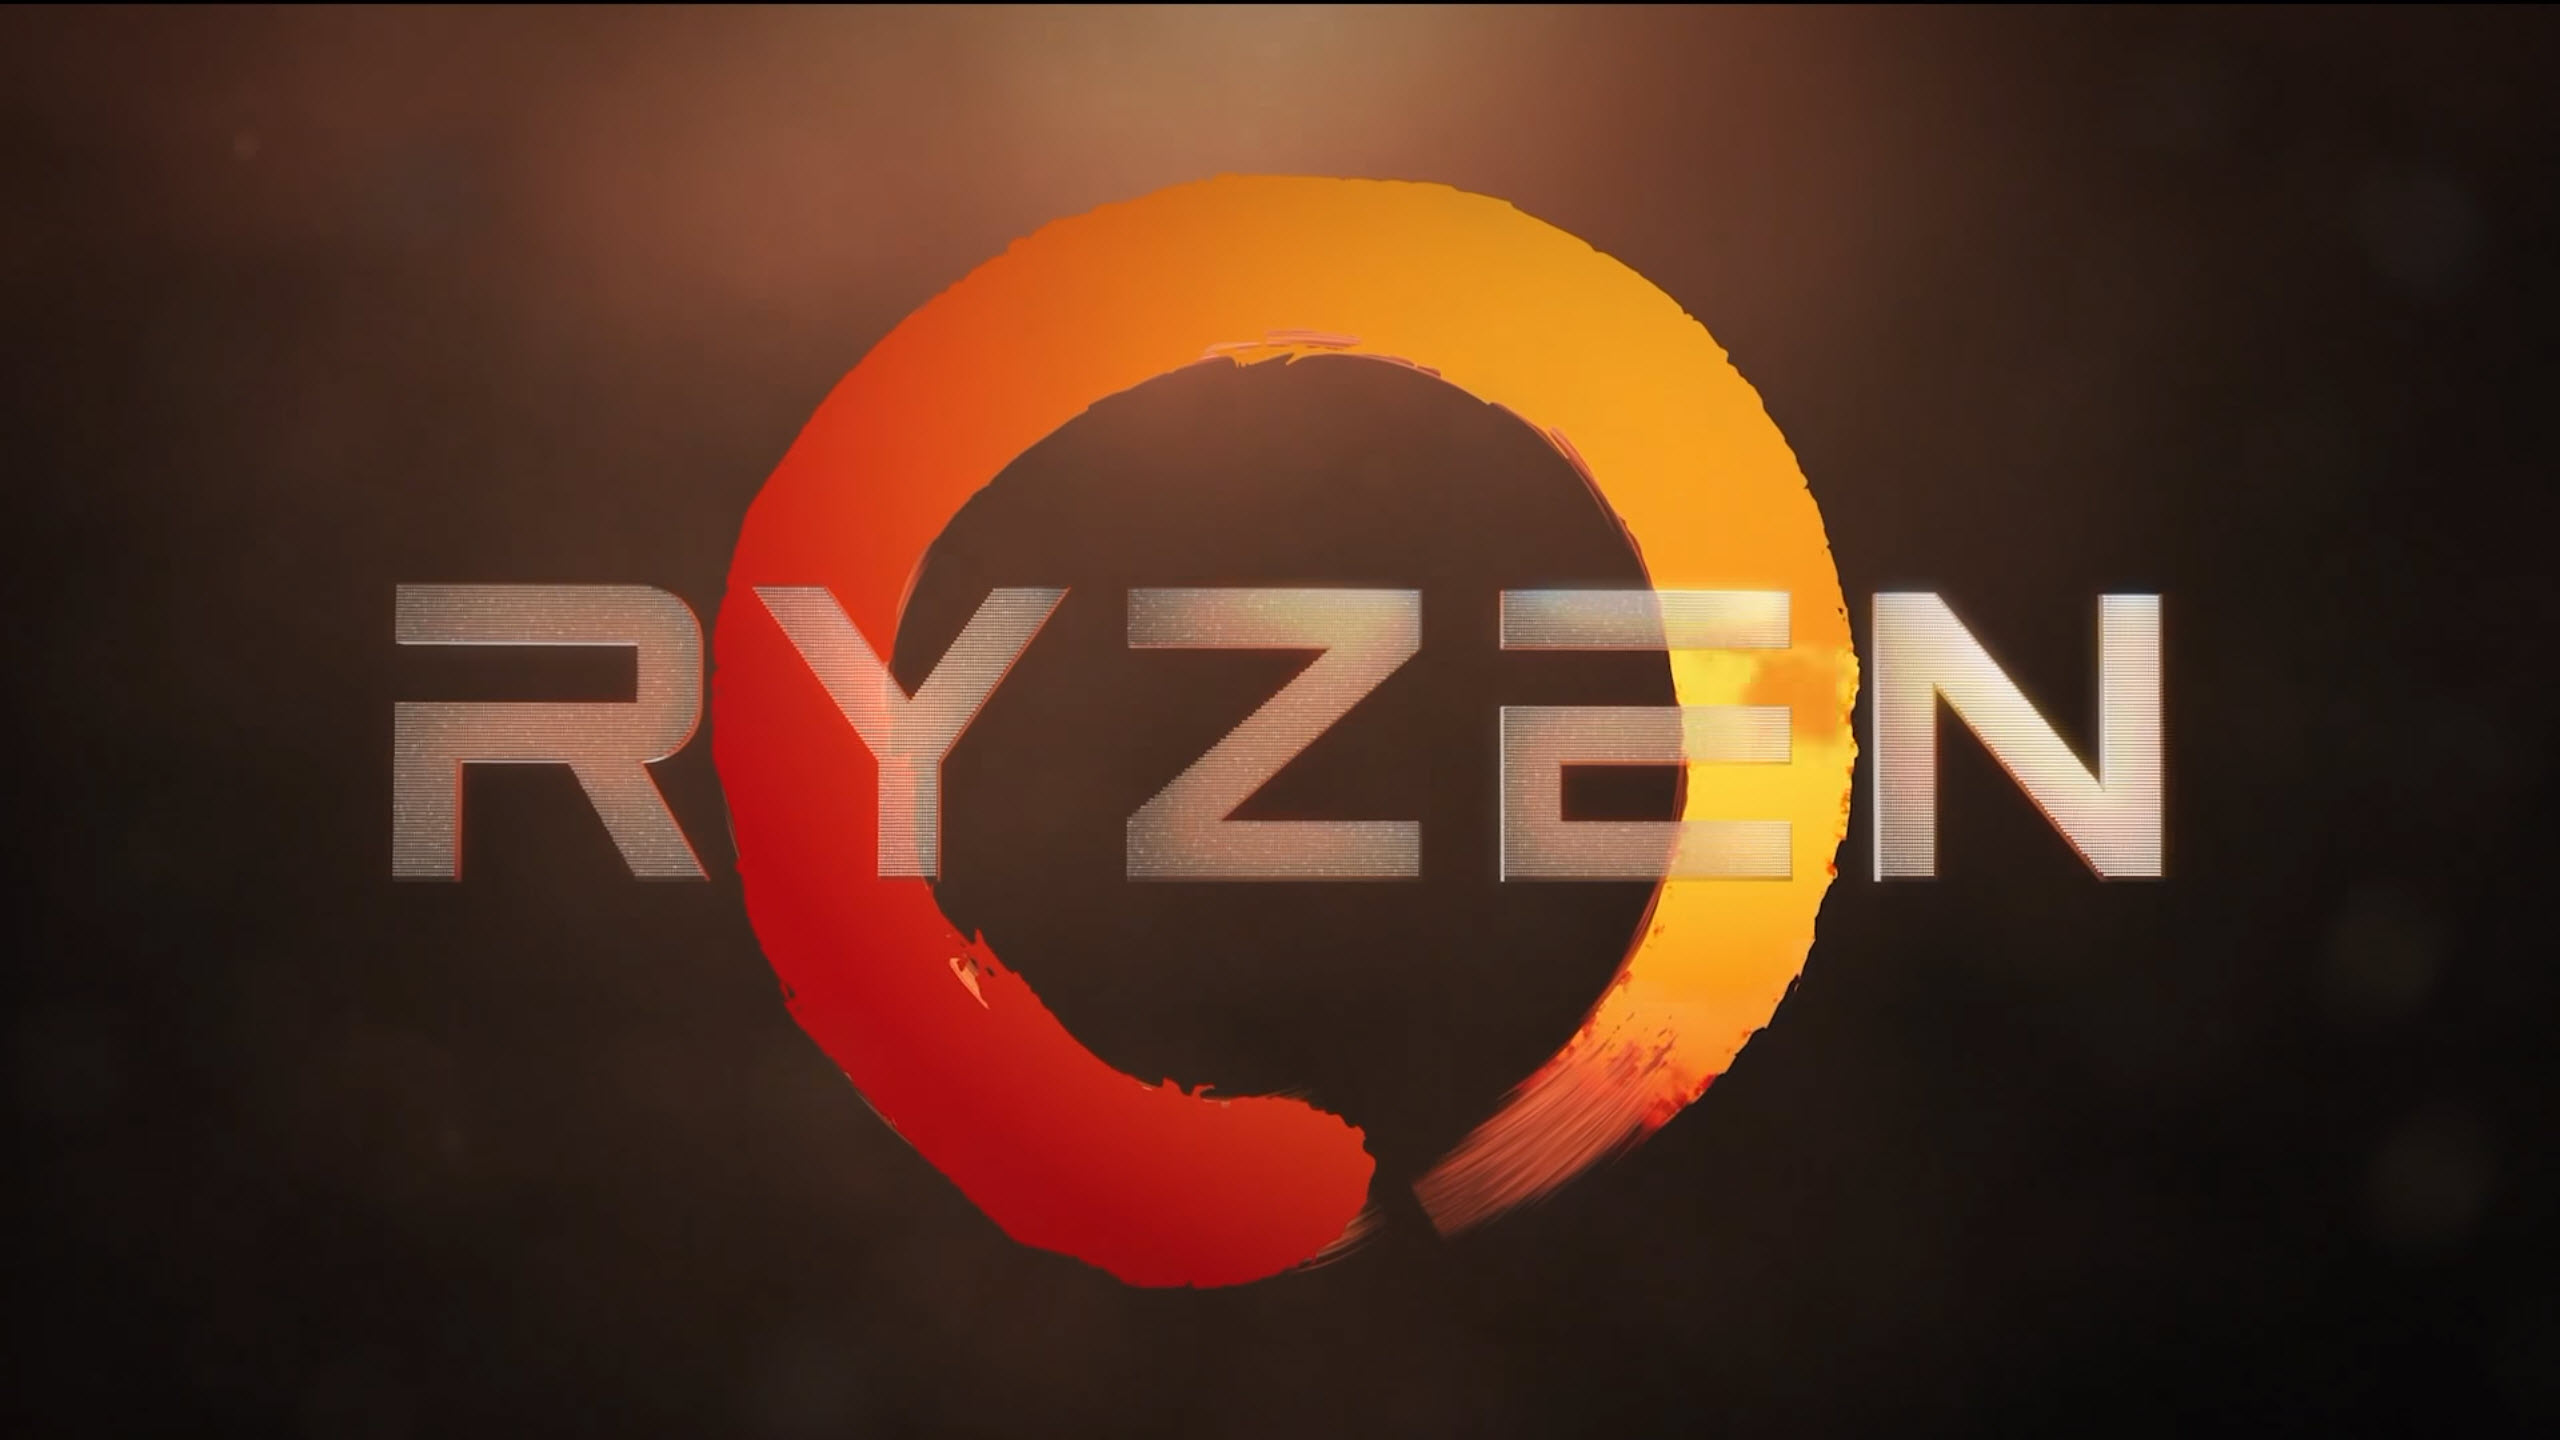 AMD Issues Update on Ryzen Addressing Thread Scheduling, Temperature Reporting, Power Plans, and SMT